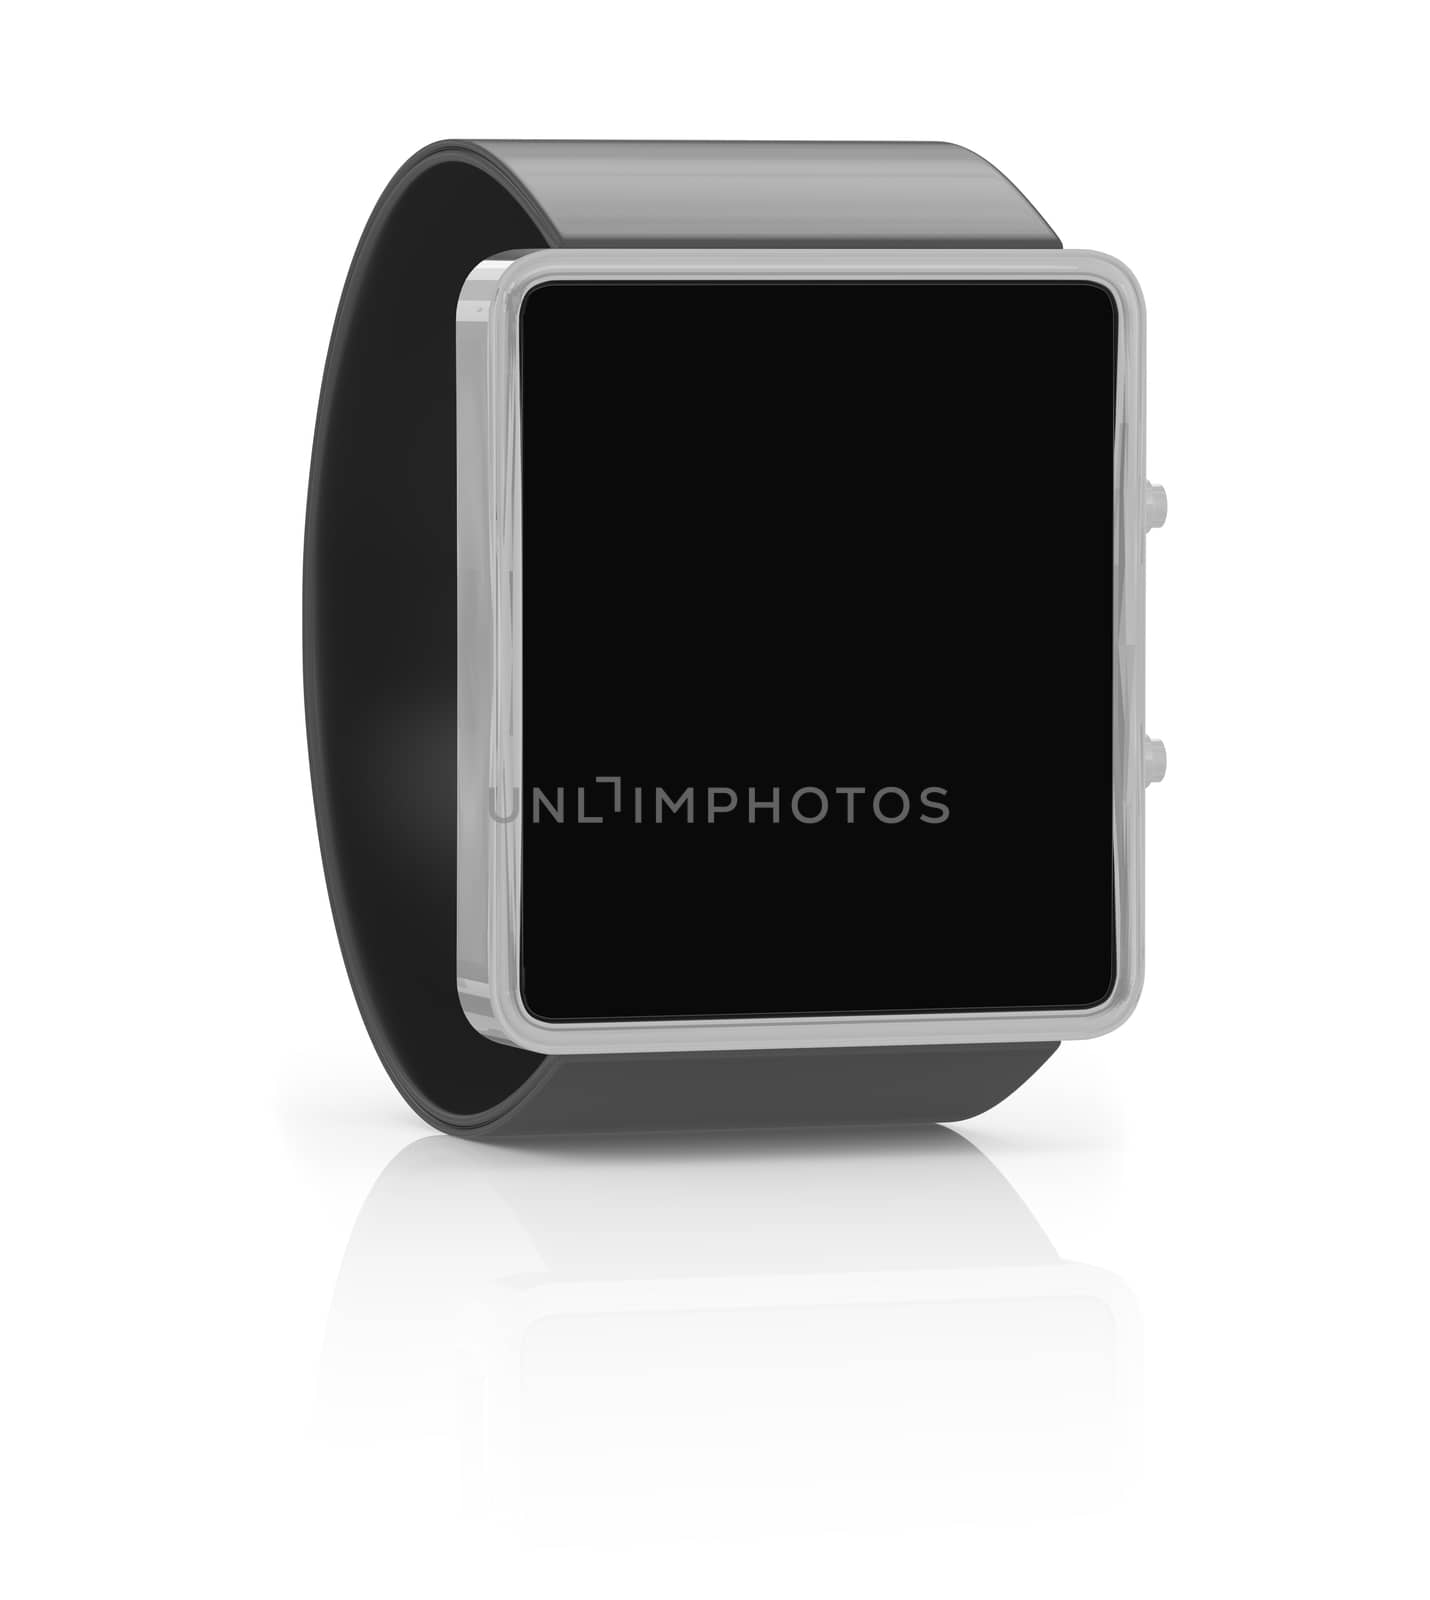 Smart watch isolated on white background. 3D illustration